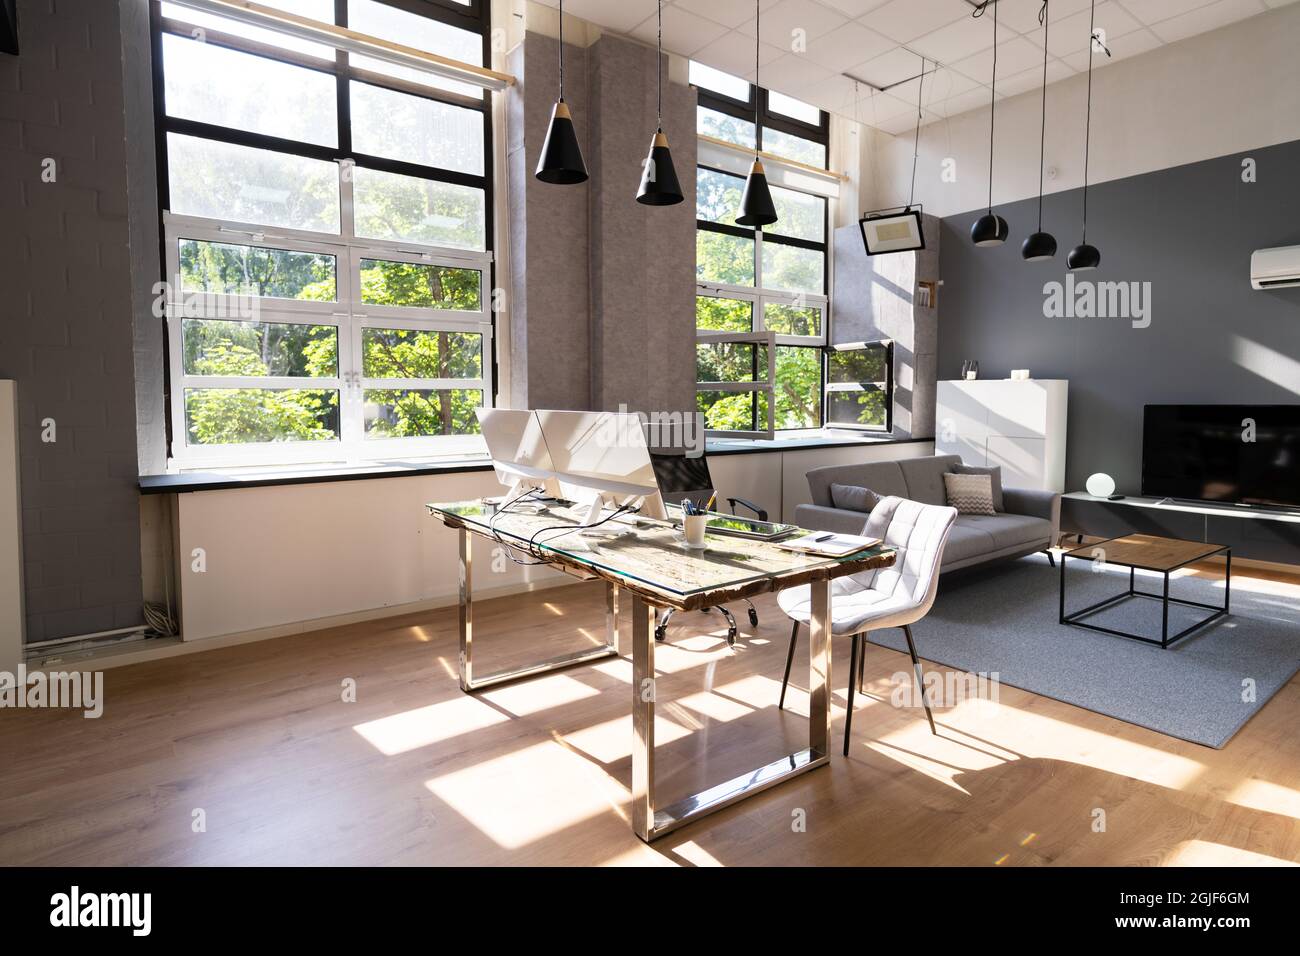 Work From Home Desk With Desktop Computer In Modern Home Stock Photo